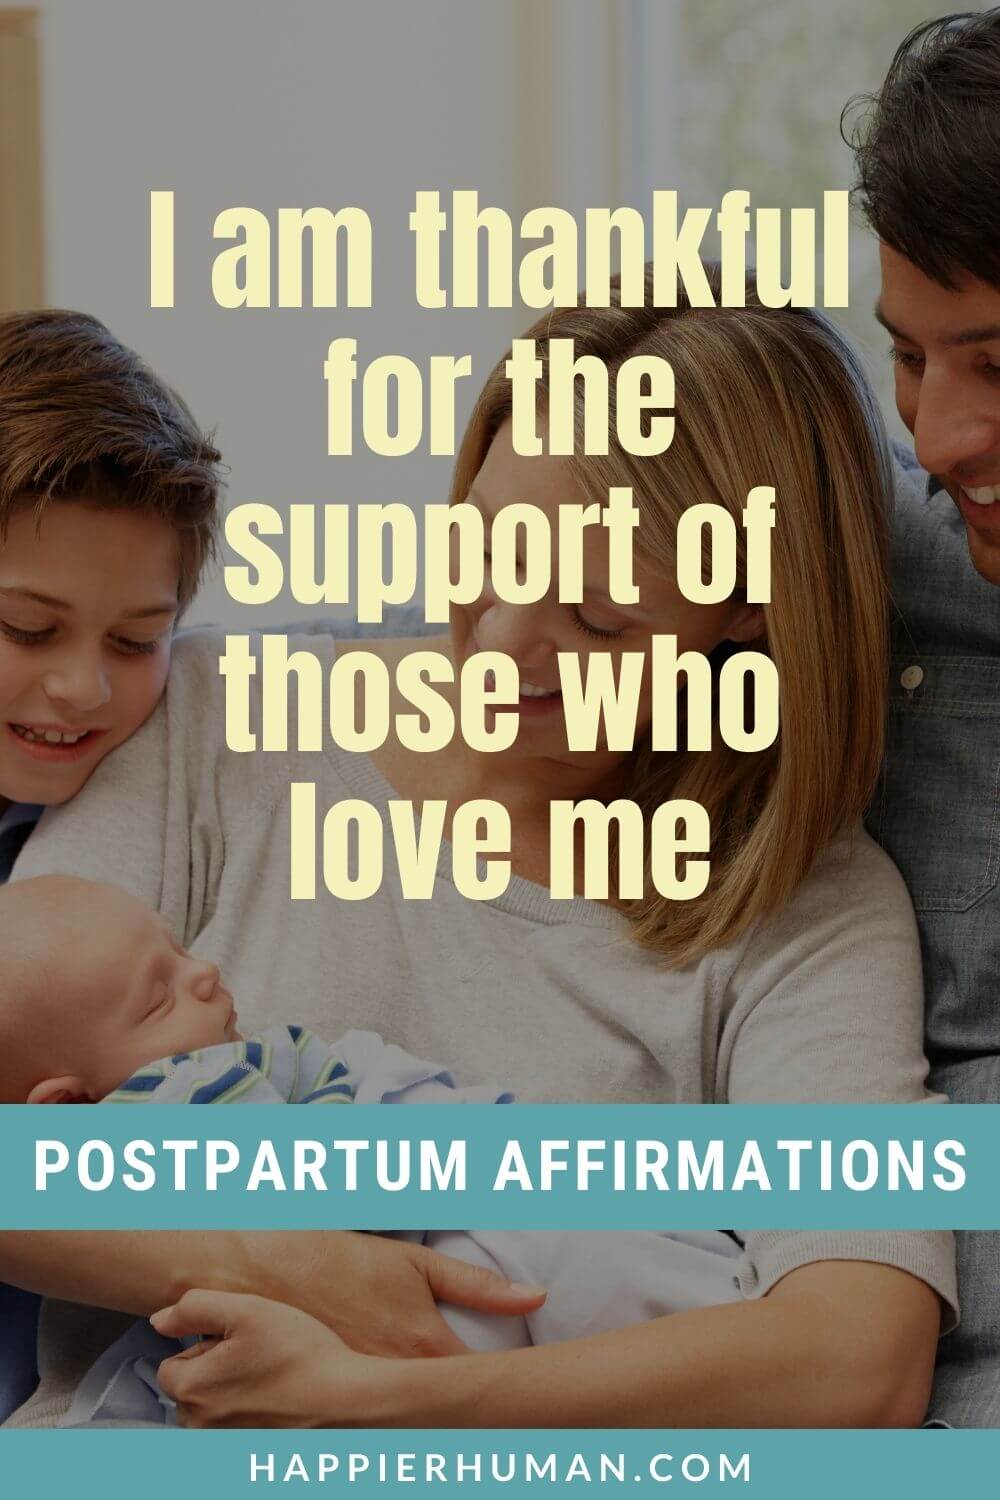 Postpartum Affirmations - I am thankful for the support of those who love me | pregnancy affirmations | postpartum affirmation cards | affirmations for breastfeeding